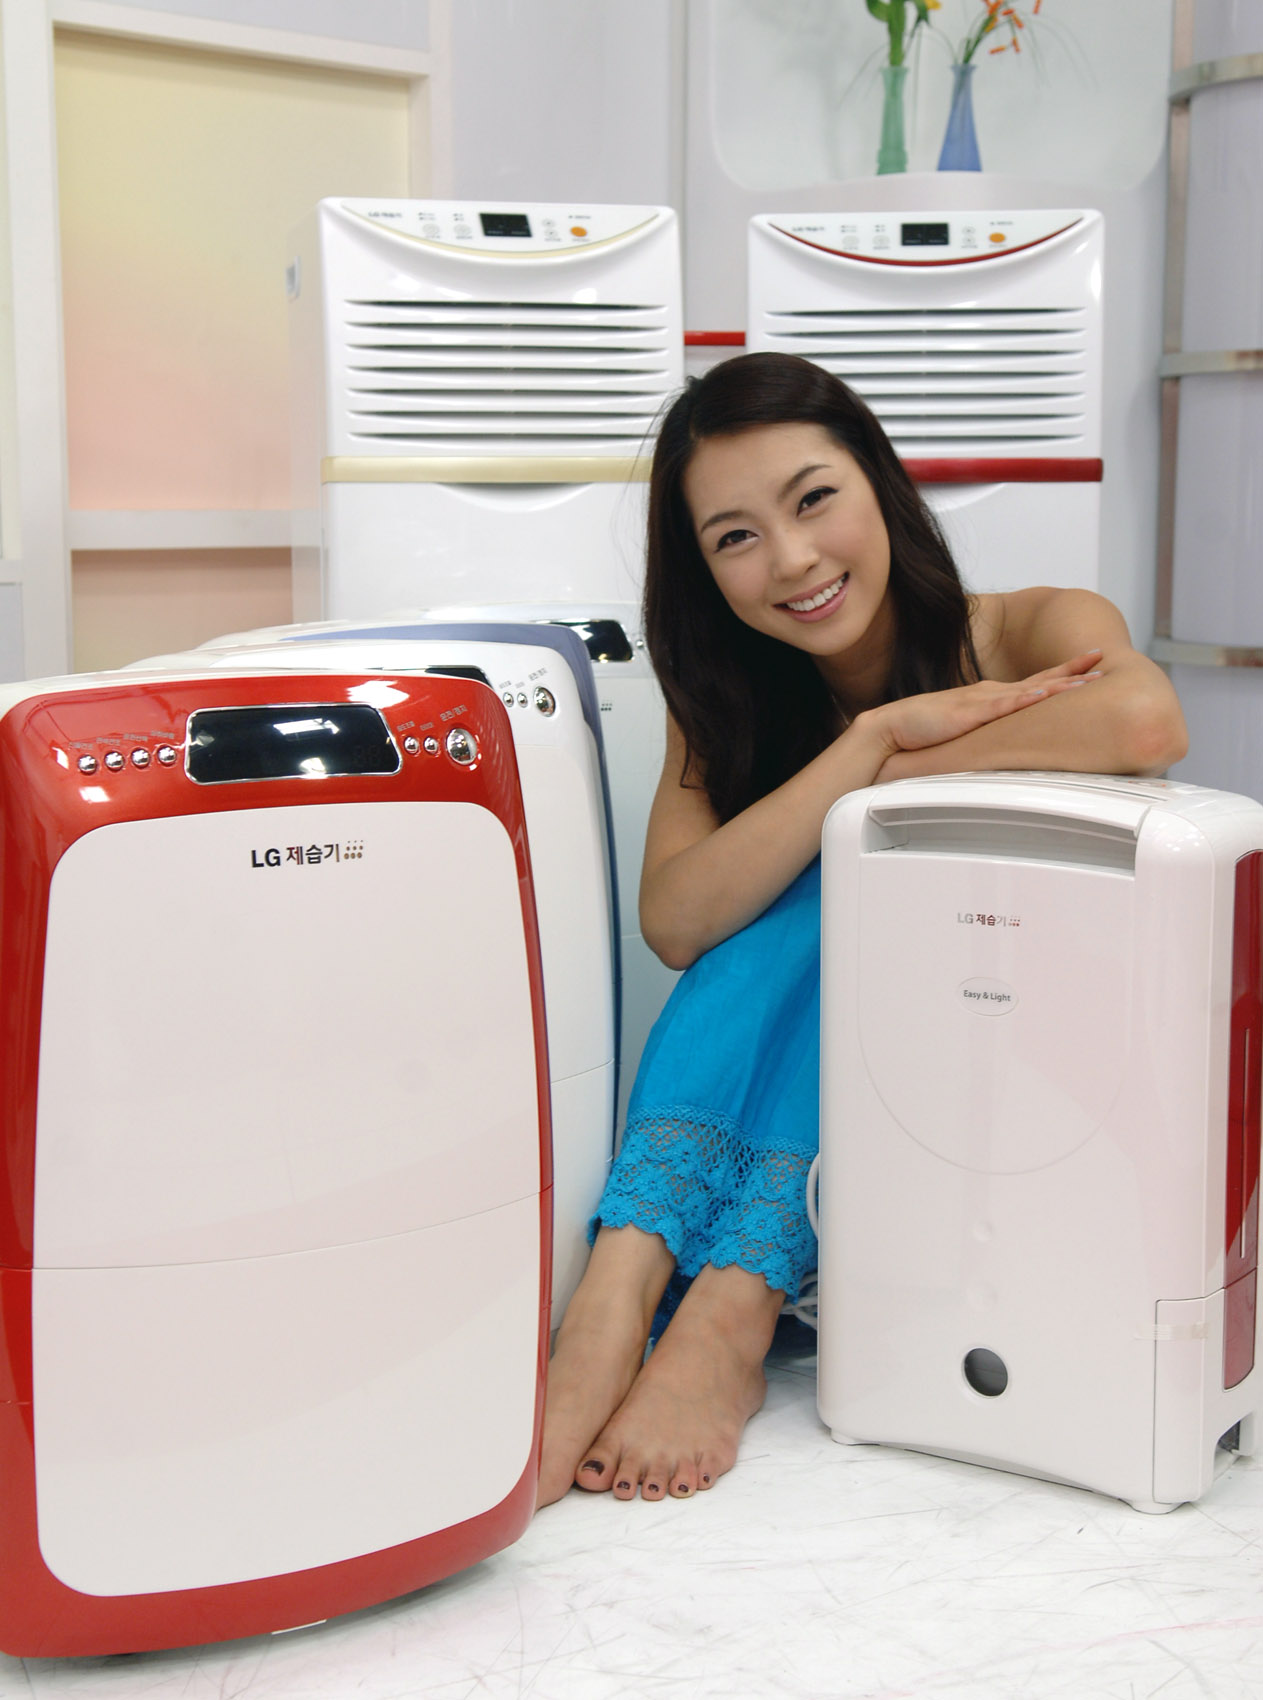 a pretty young woman sitting next to a refrigerator